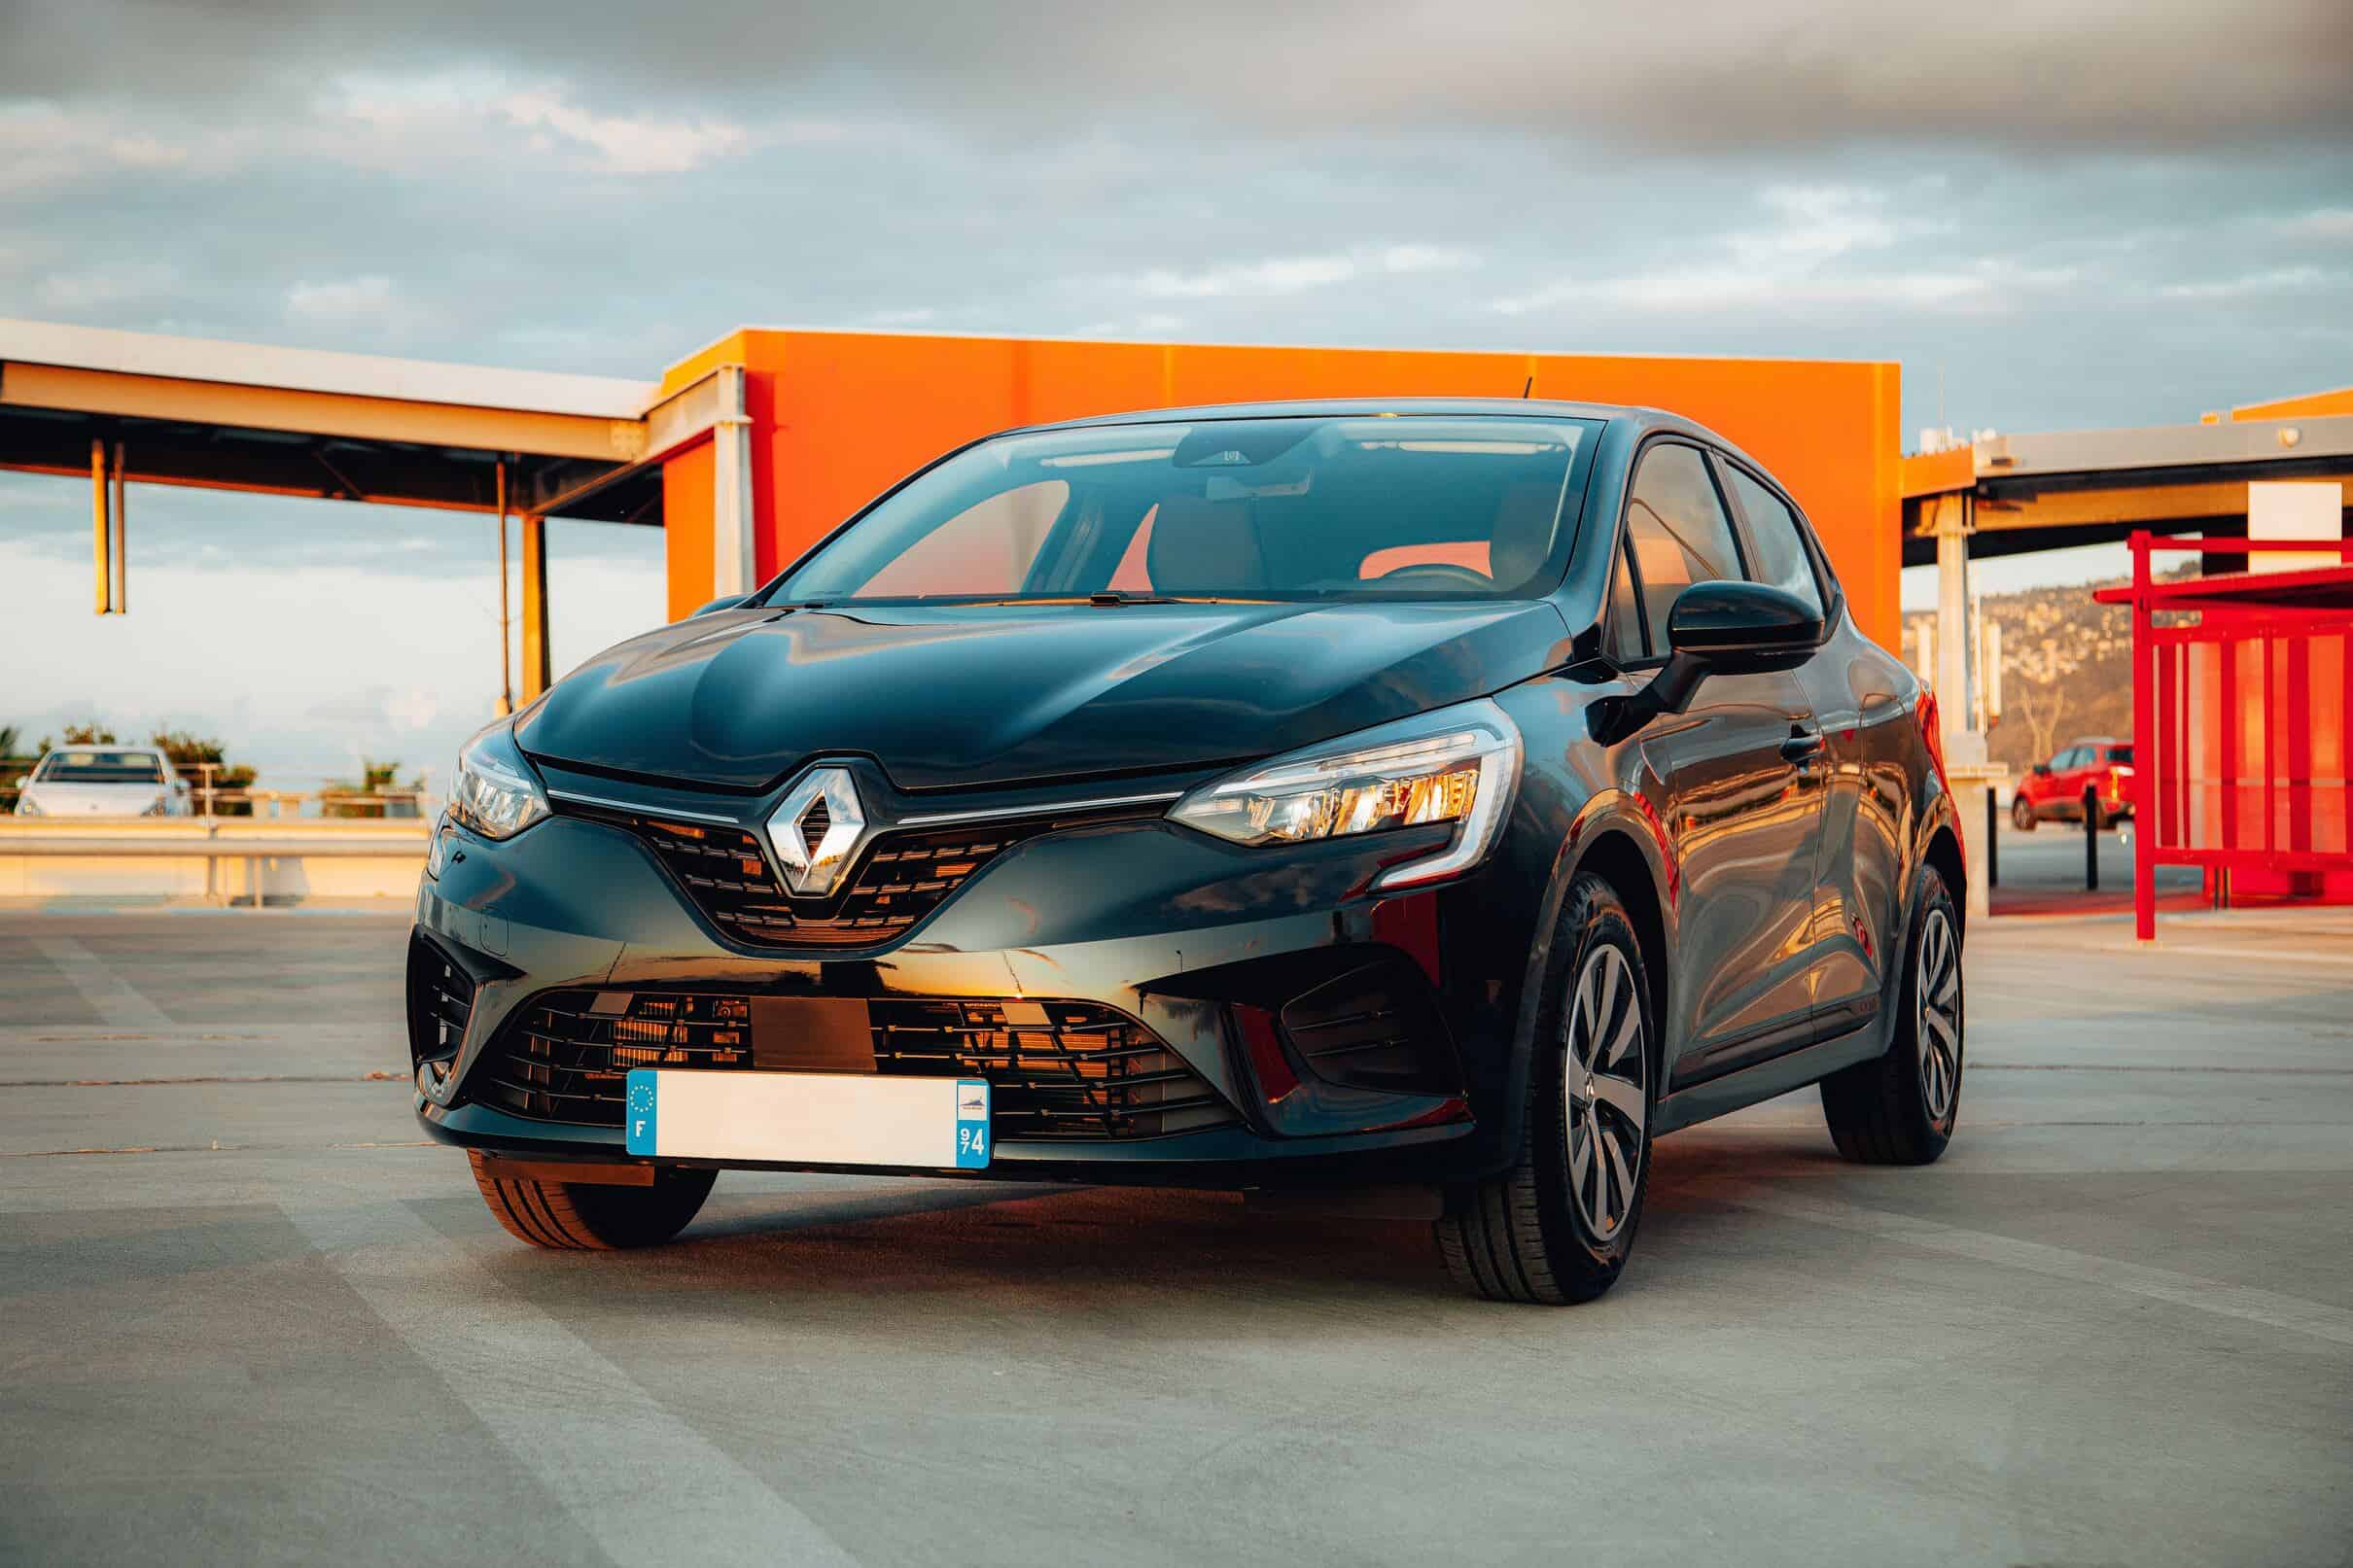 Vauxhall Corsa vs Renault Clio - Which is Better?